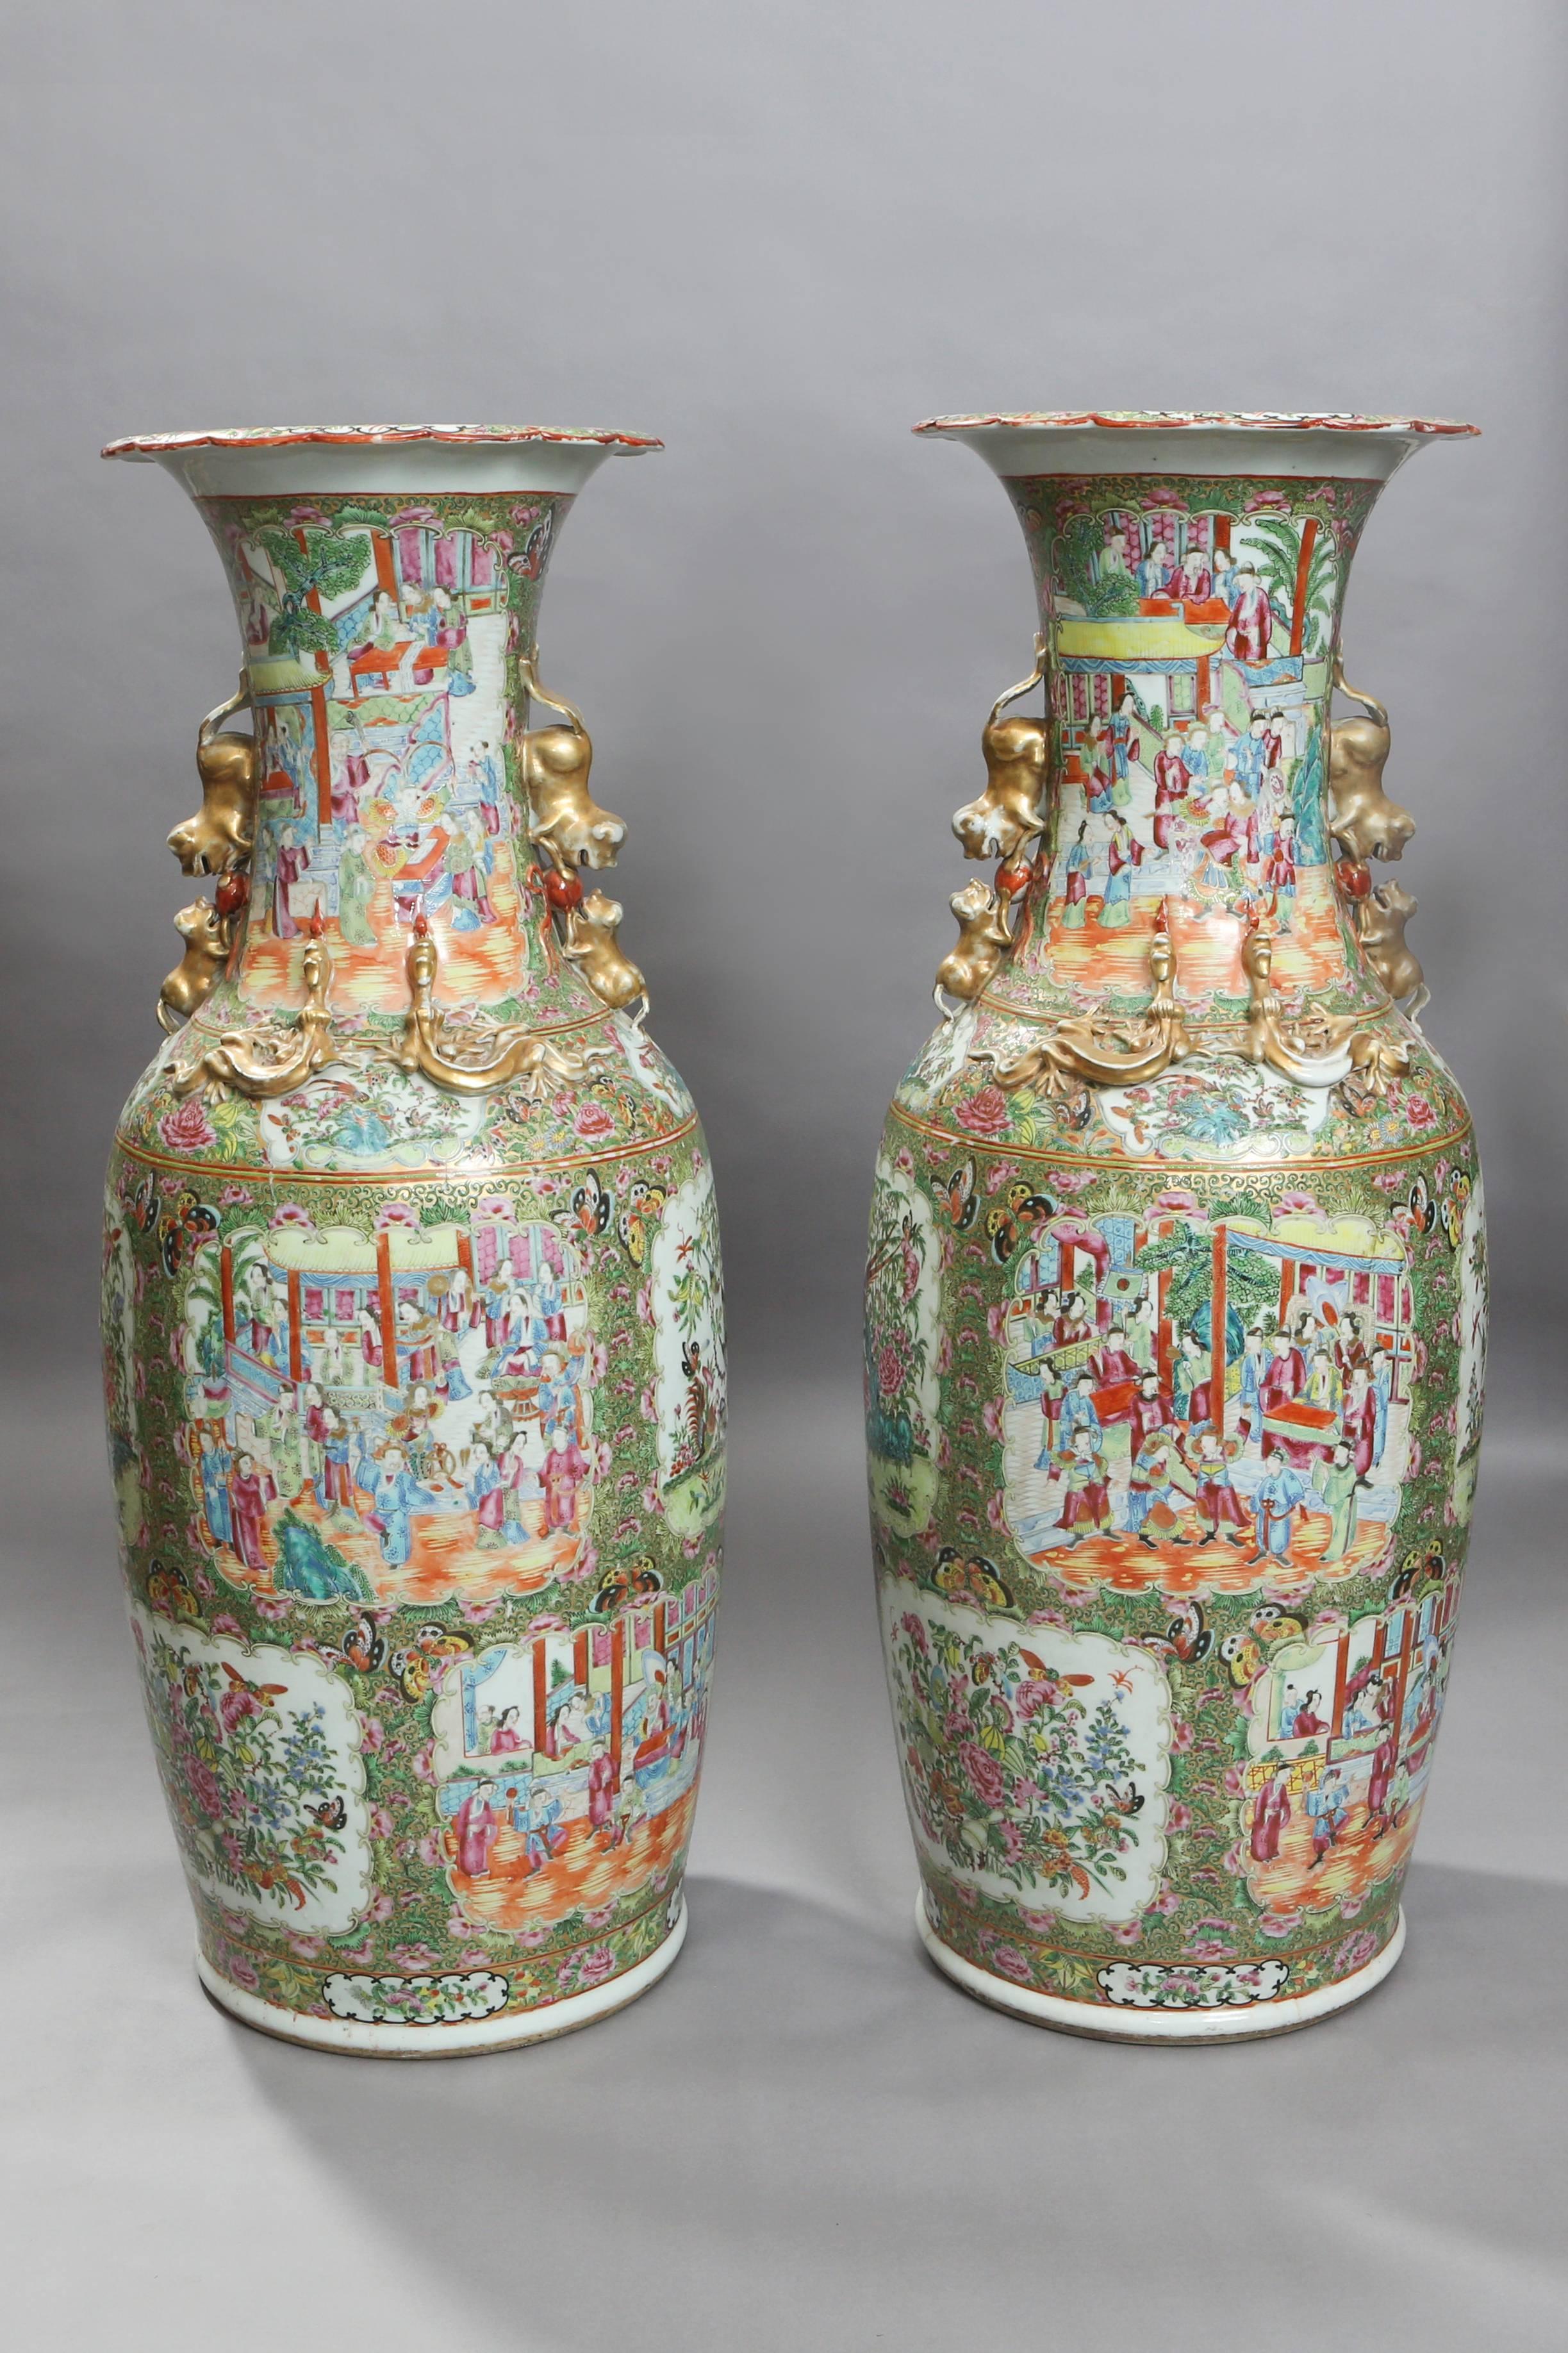 These large 19th century Canton export vases are enamelled all-over with variant panels of: court scenes, flowers, insects, and precious objects. The handles are each decorated with a lion and pup, playing with a ball. Protruding outwards from the